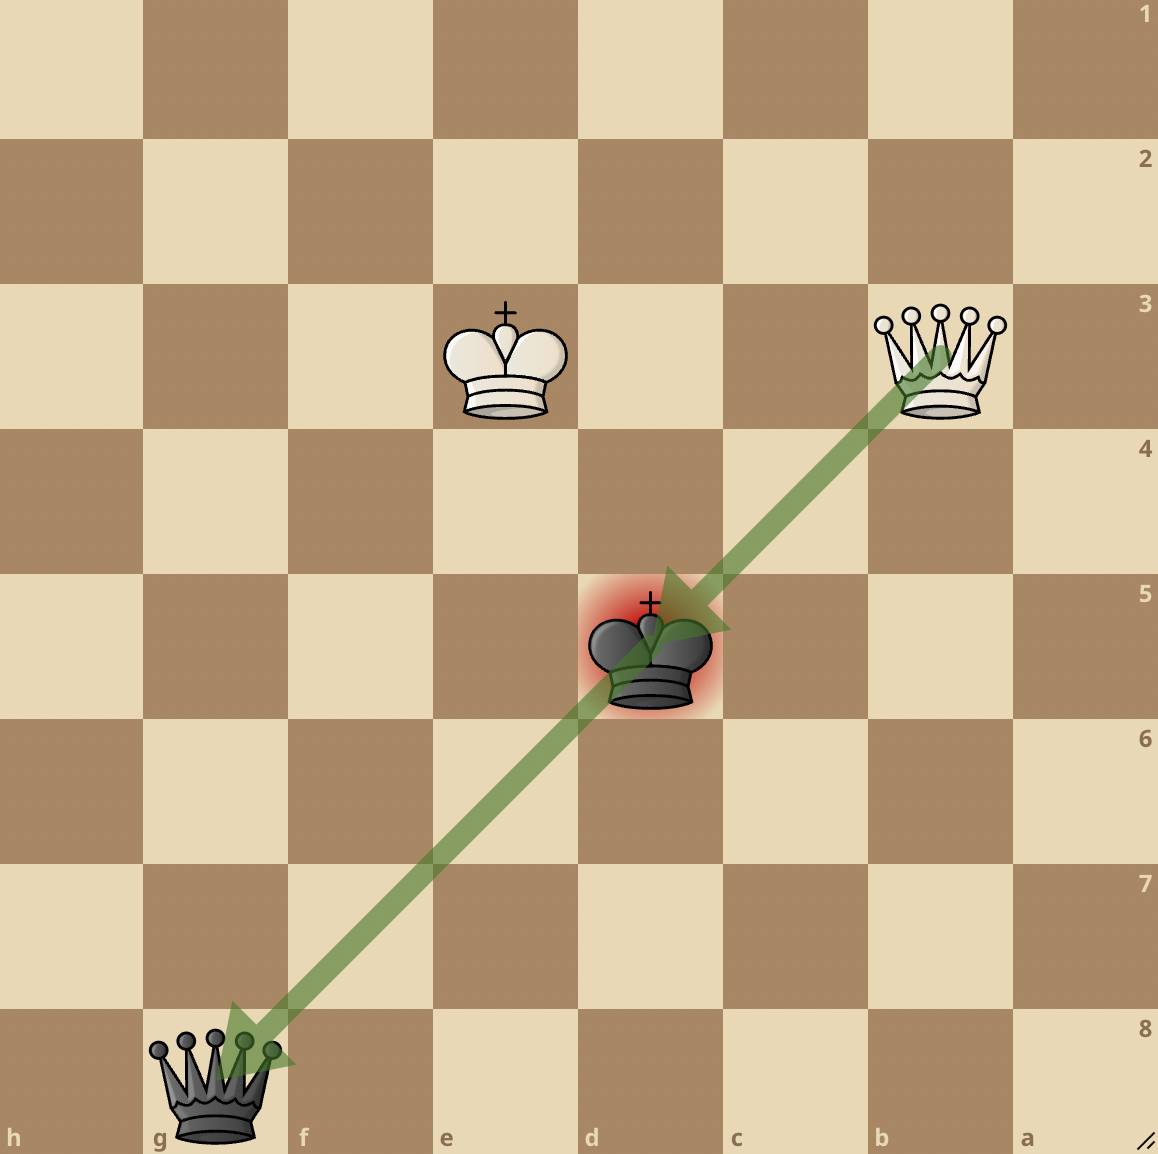 Skewer in chess